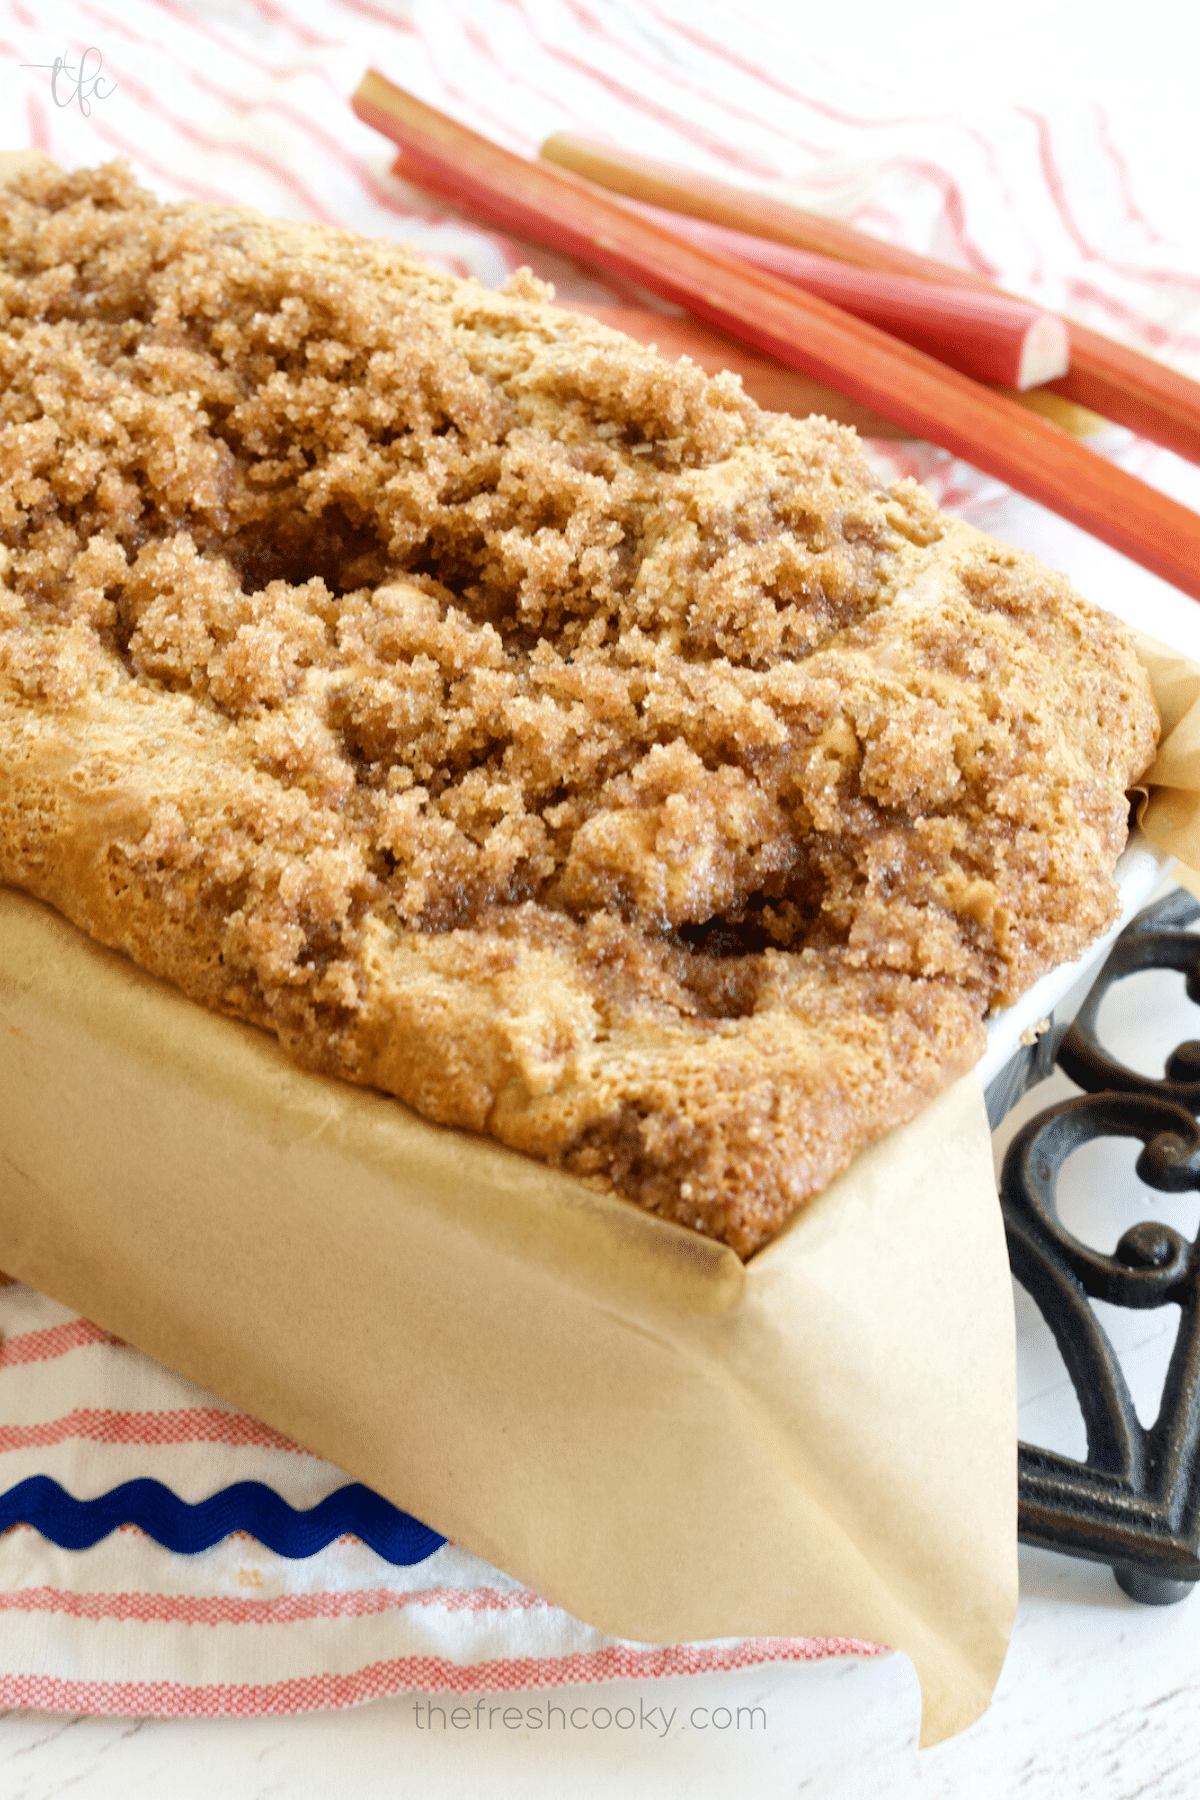 Loaf of cinnamon streusel topping buttermilk rhubarb bread in loaf pan lined with parchment paper.